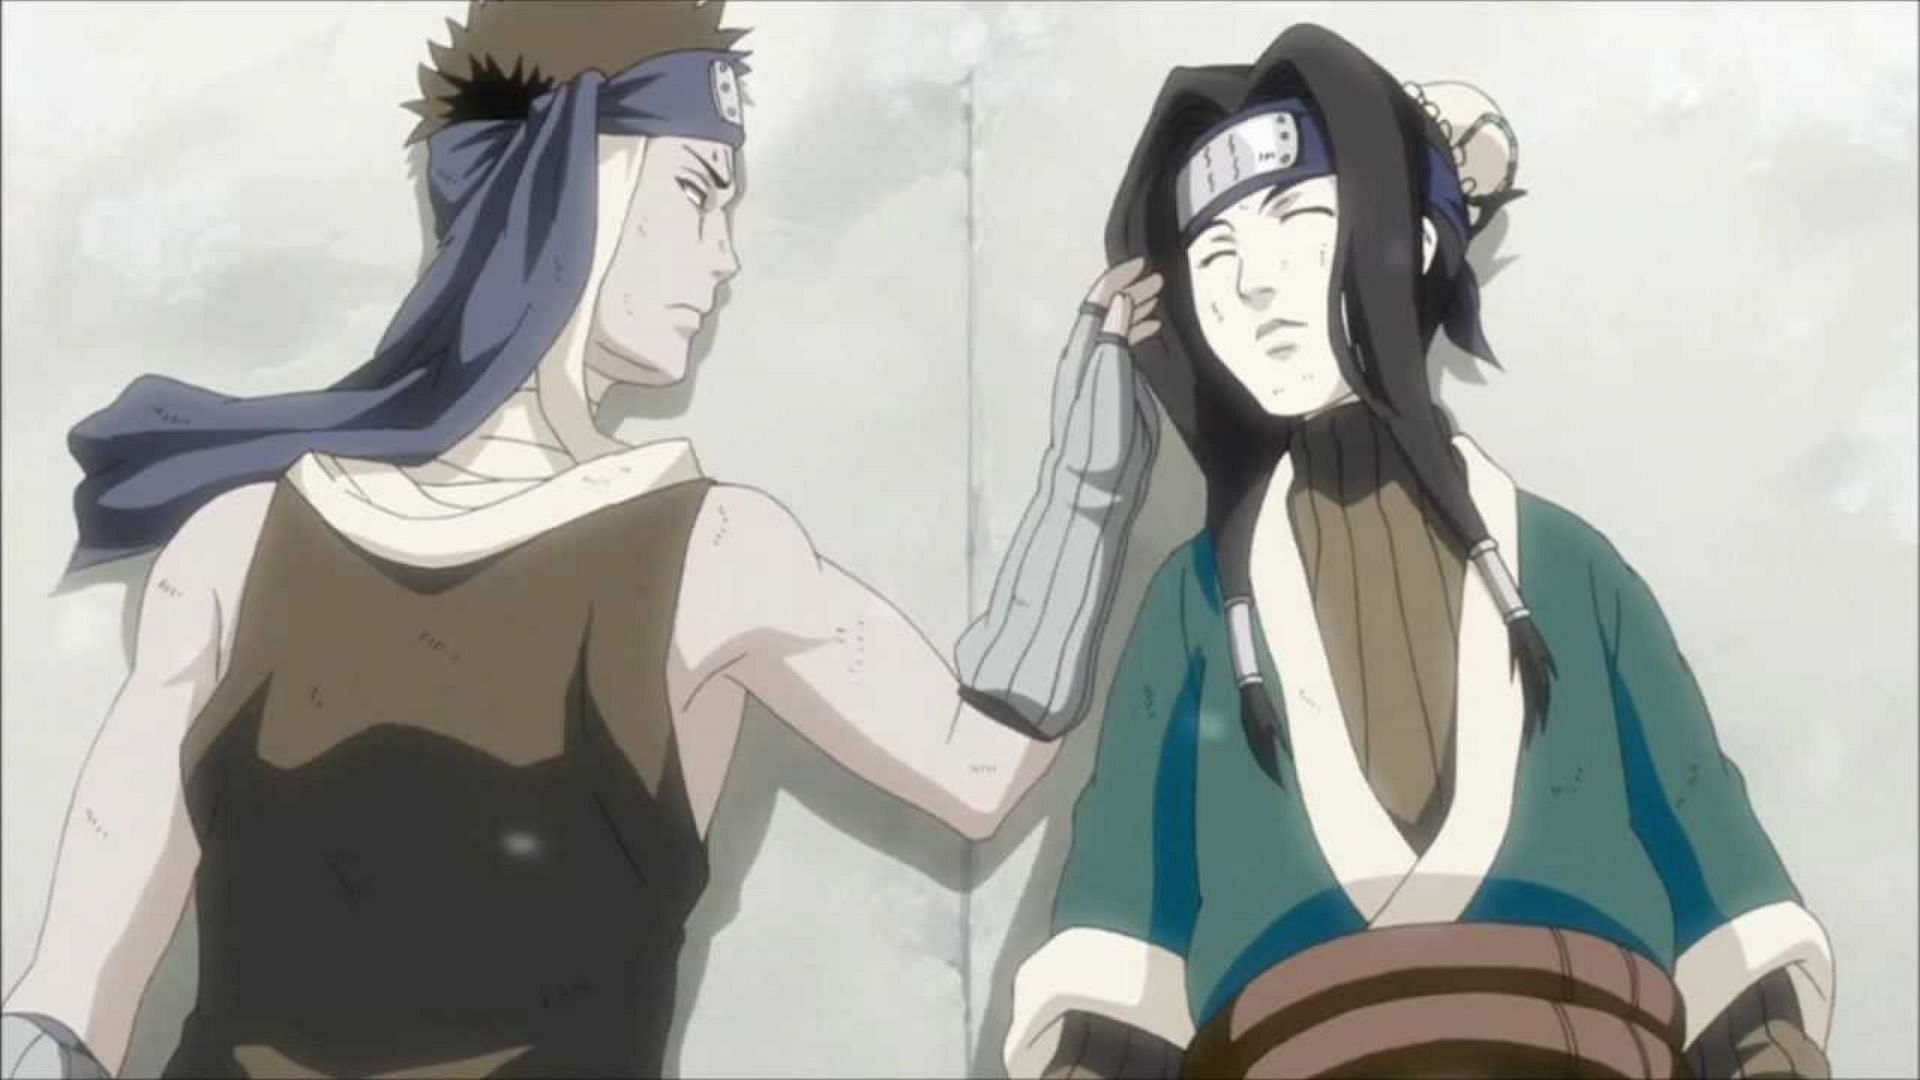 Zabuza and Haku at the end of their lives in Naruto (Image via Pierrot)